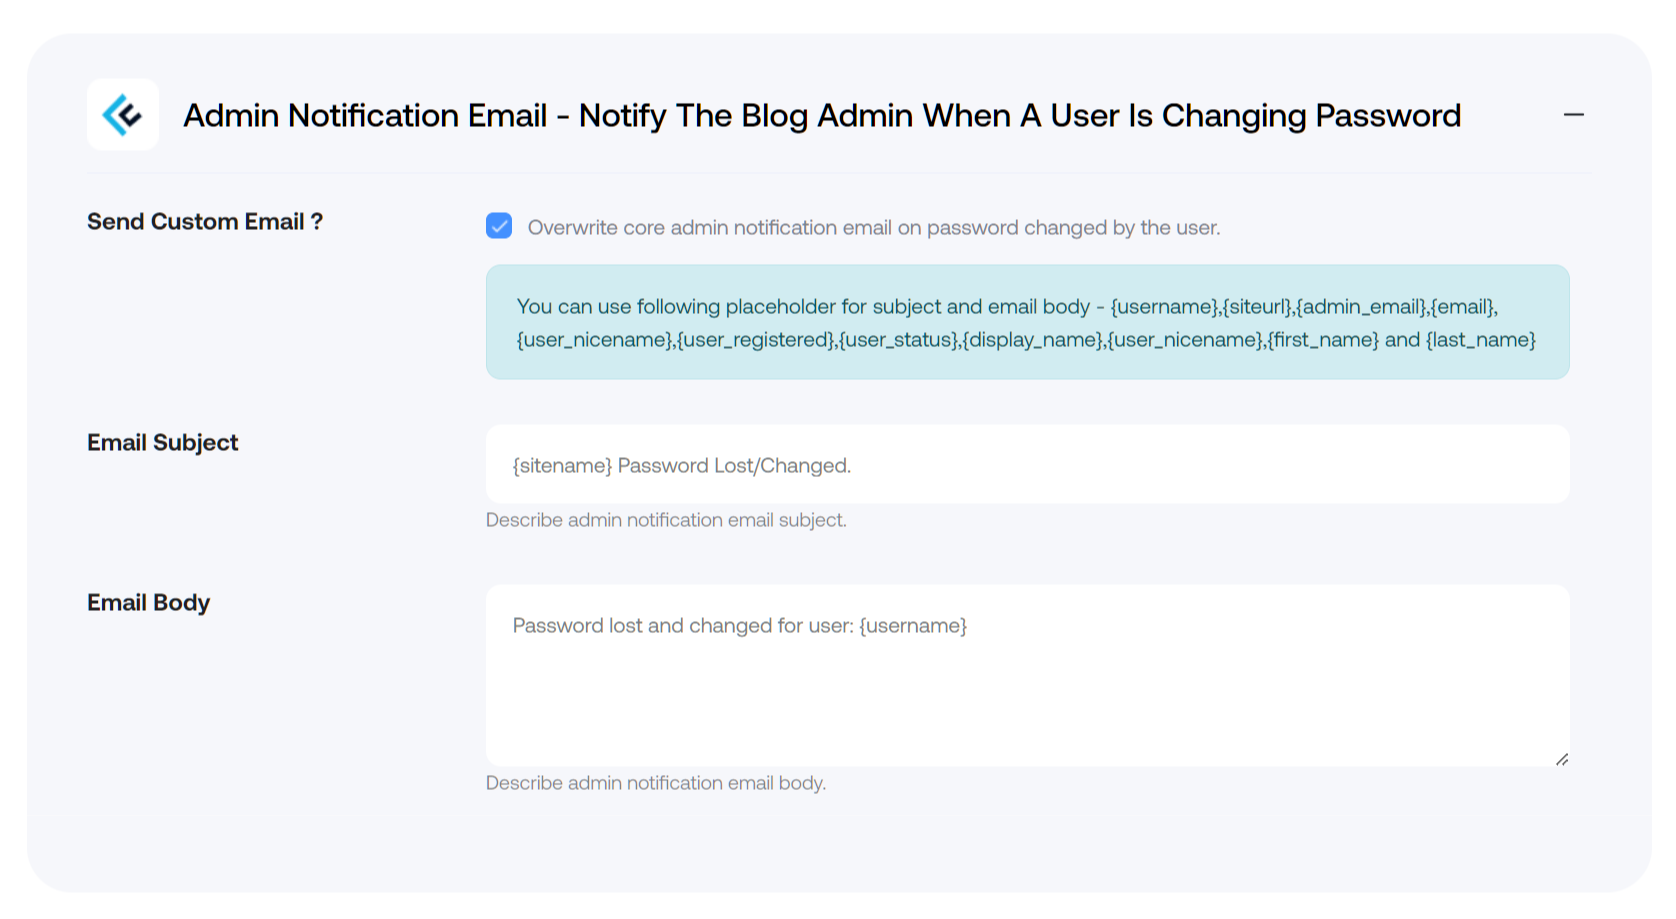 Notify the Blog Admin when a user is changing password